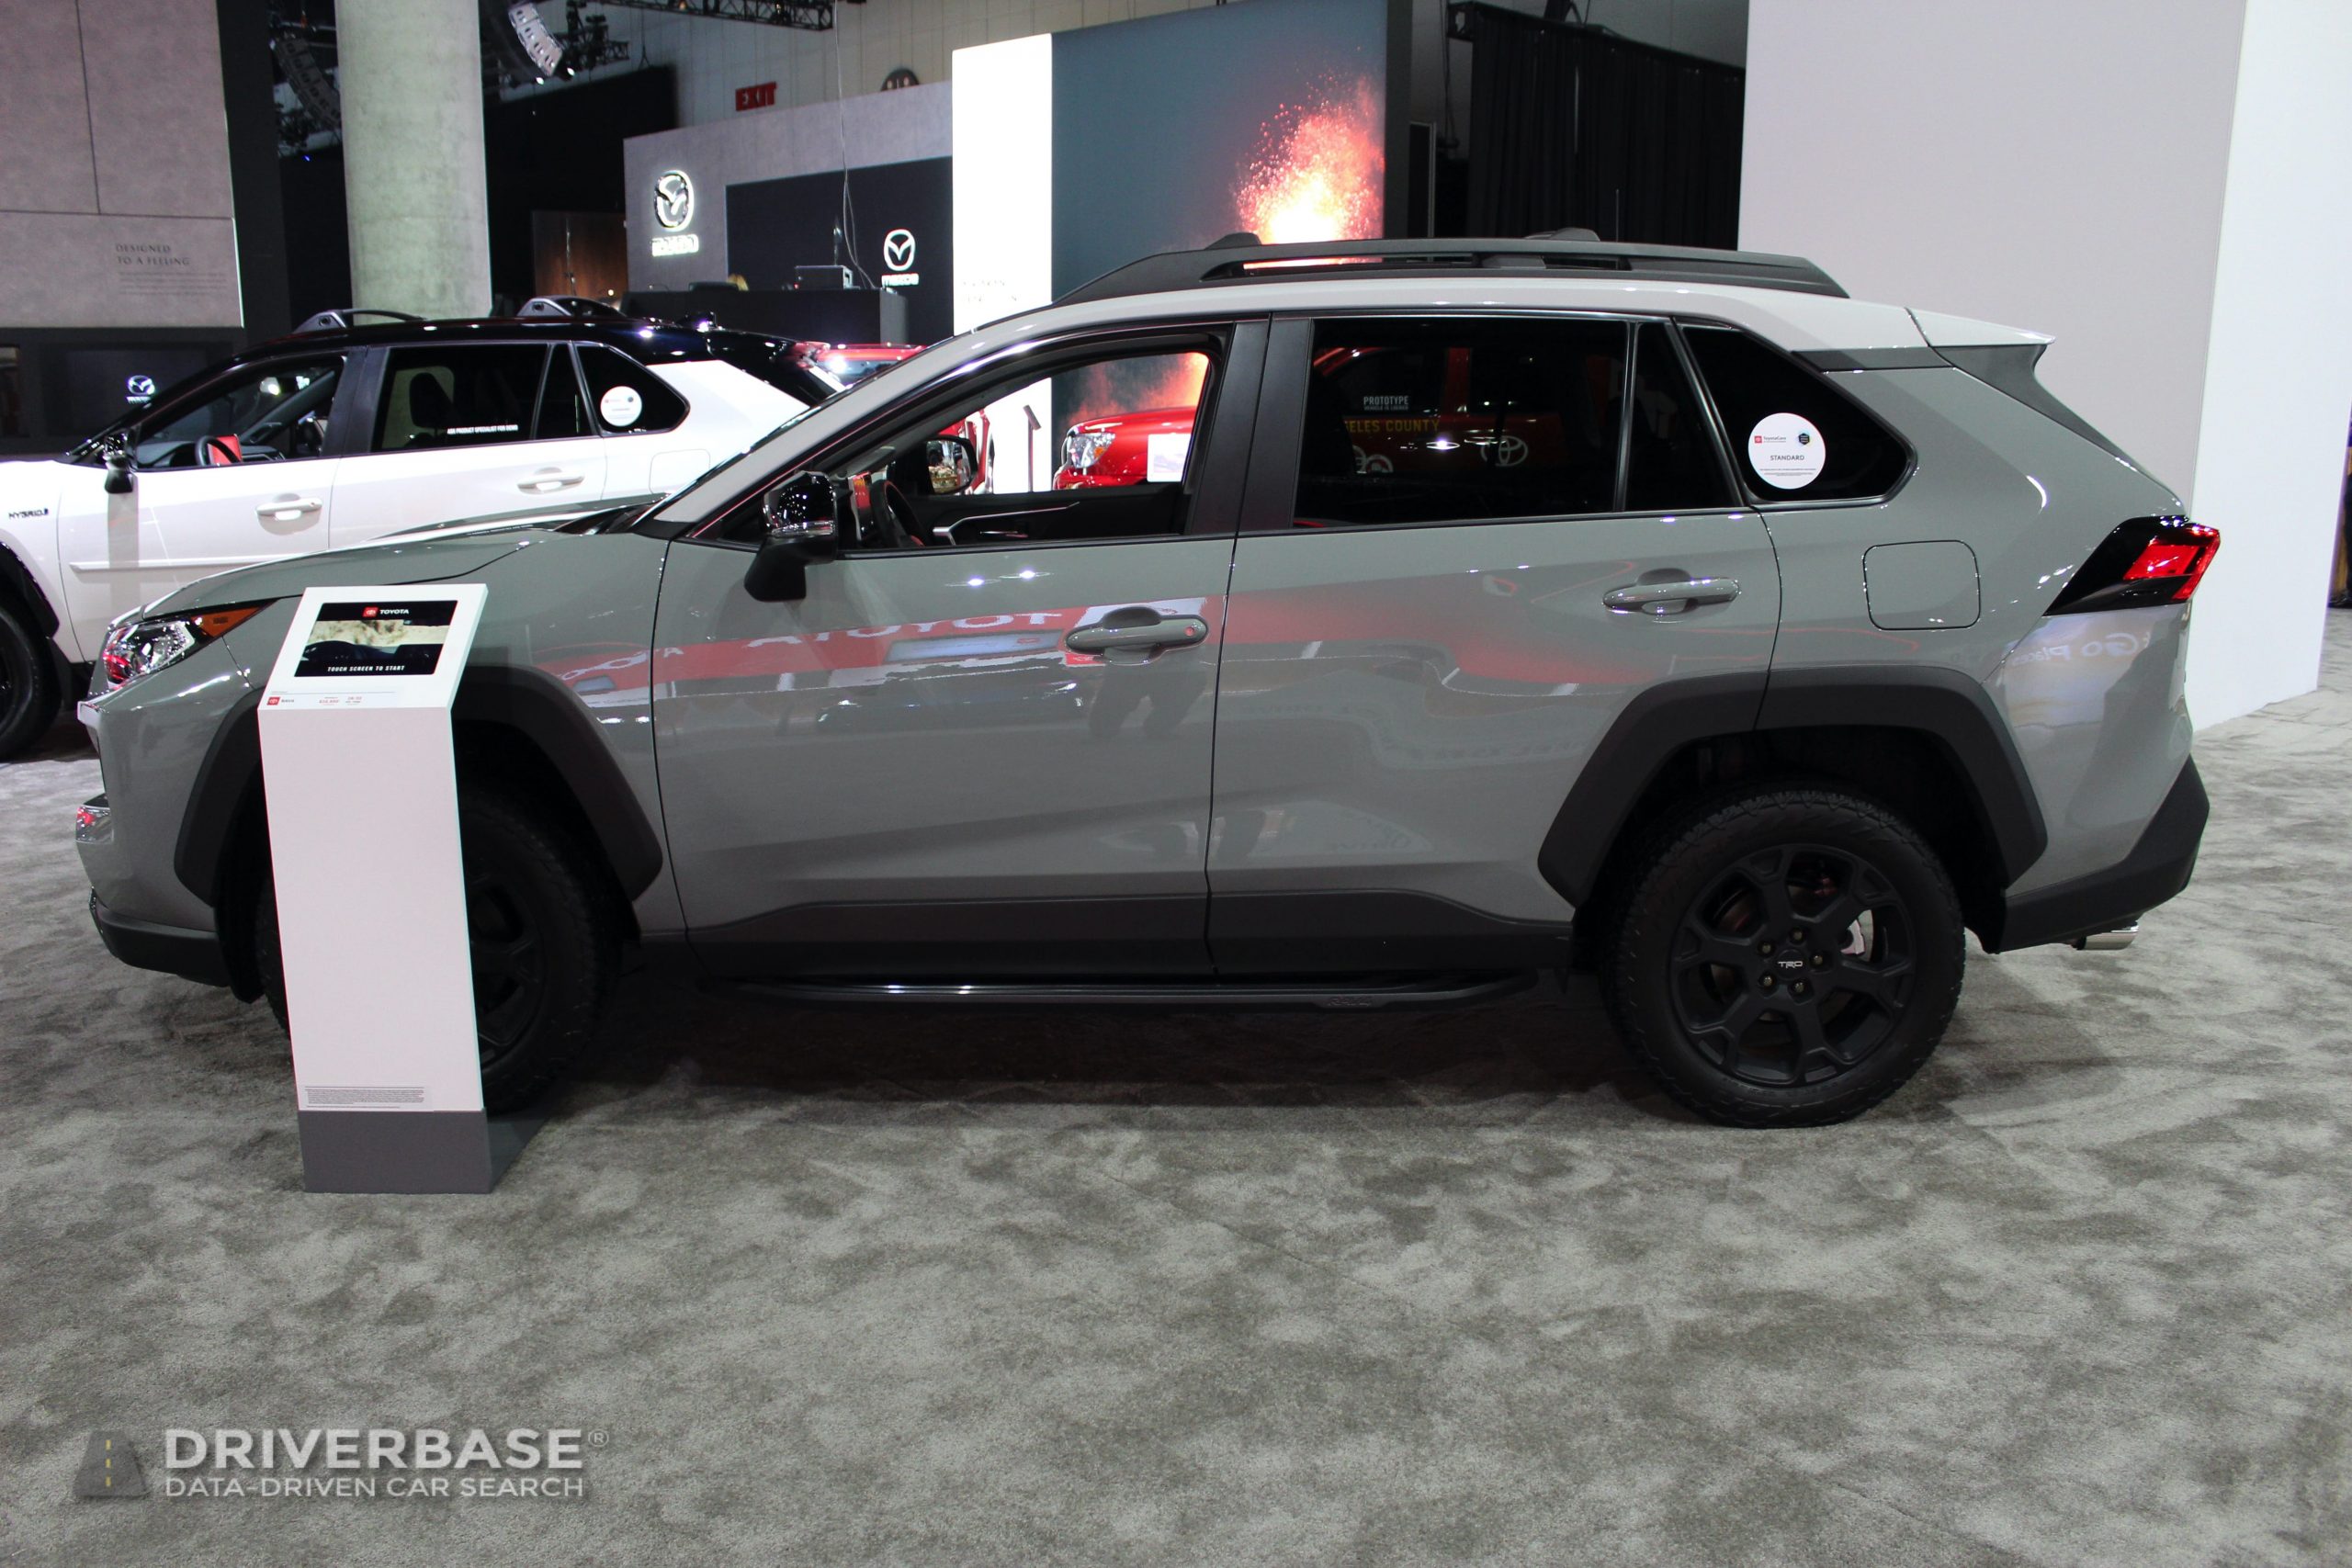 2020 Toyota RAV4 TRD Off-Road at the 2019 Los Angeles Auto Show